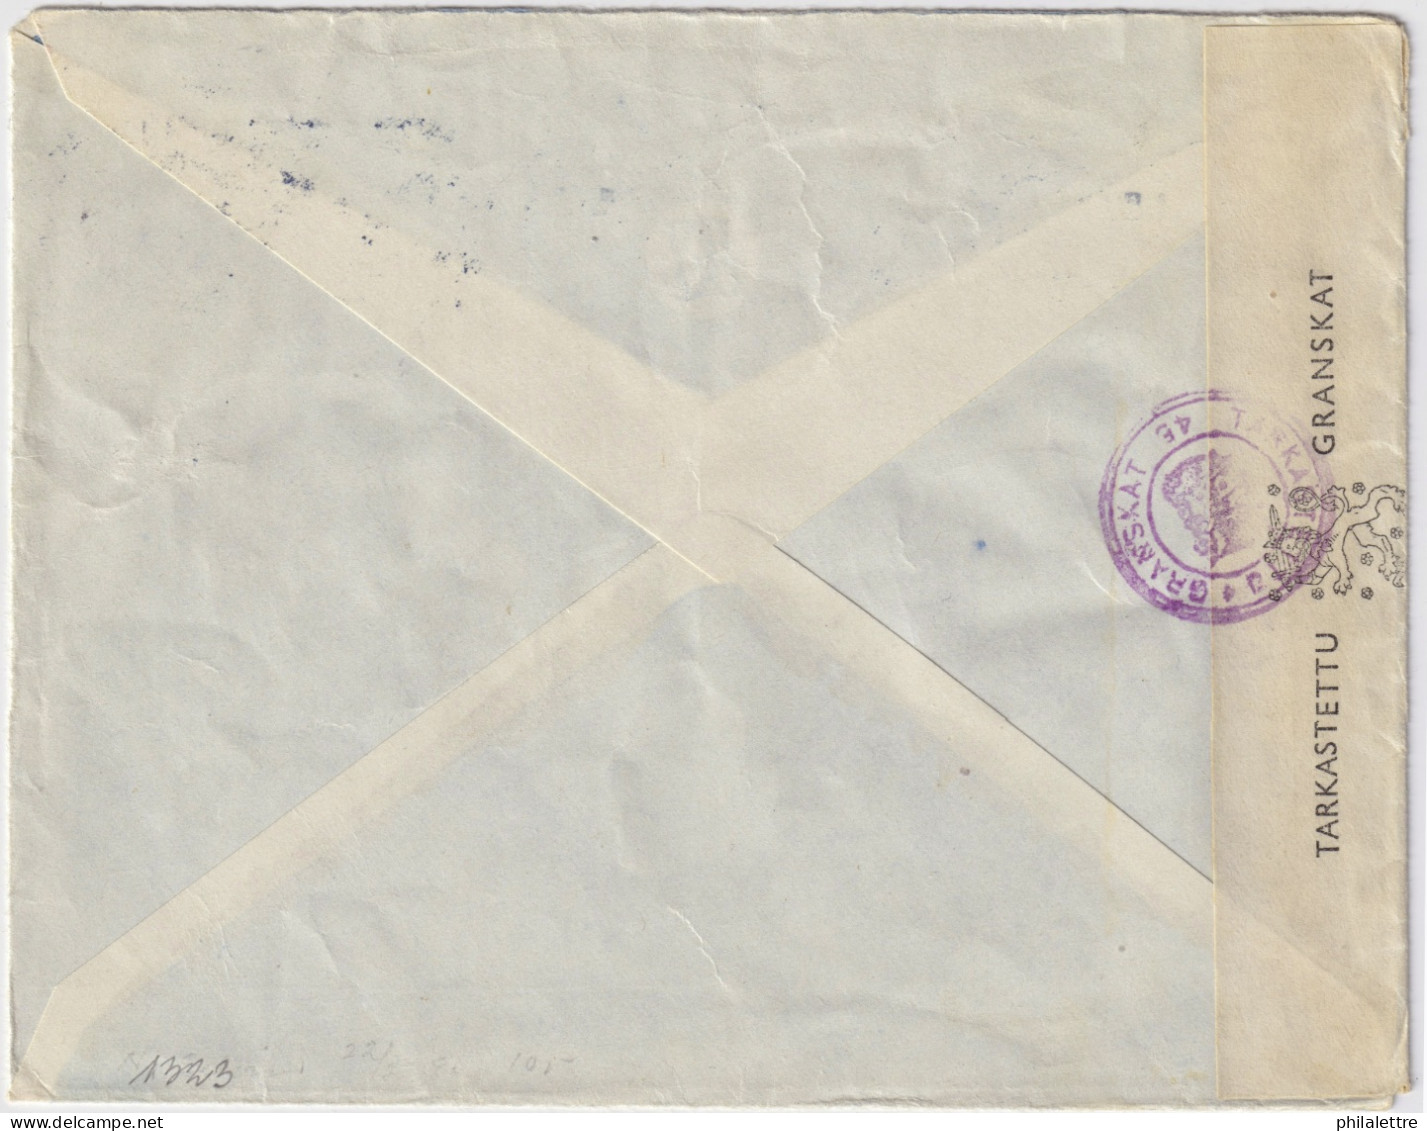 FINLAND - 1945 - Facit F258, F295 & F296 Red Cross (1942 & 45 Issues) On Censored Cover From HELSINKI To MOTALA, Sweden - Covers & Documents